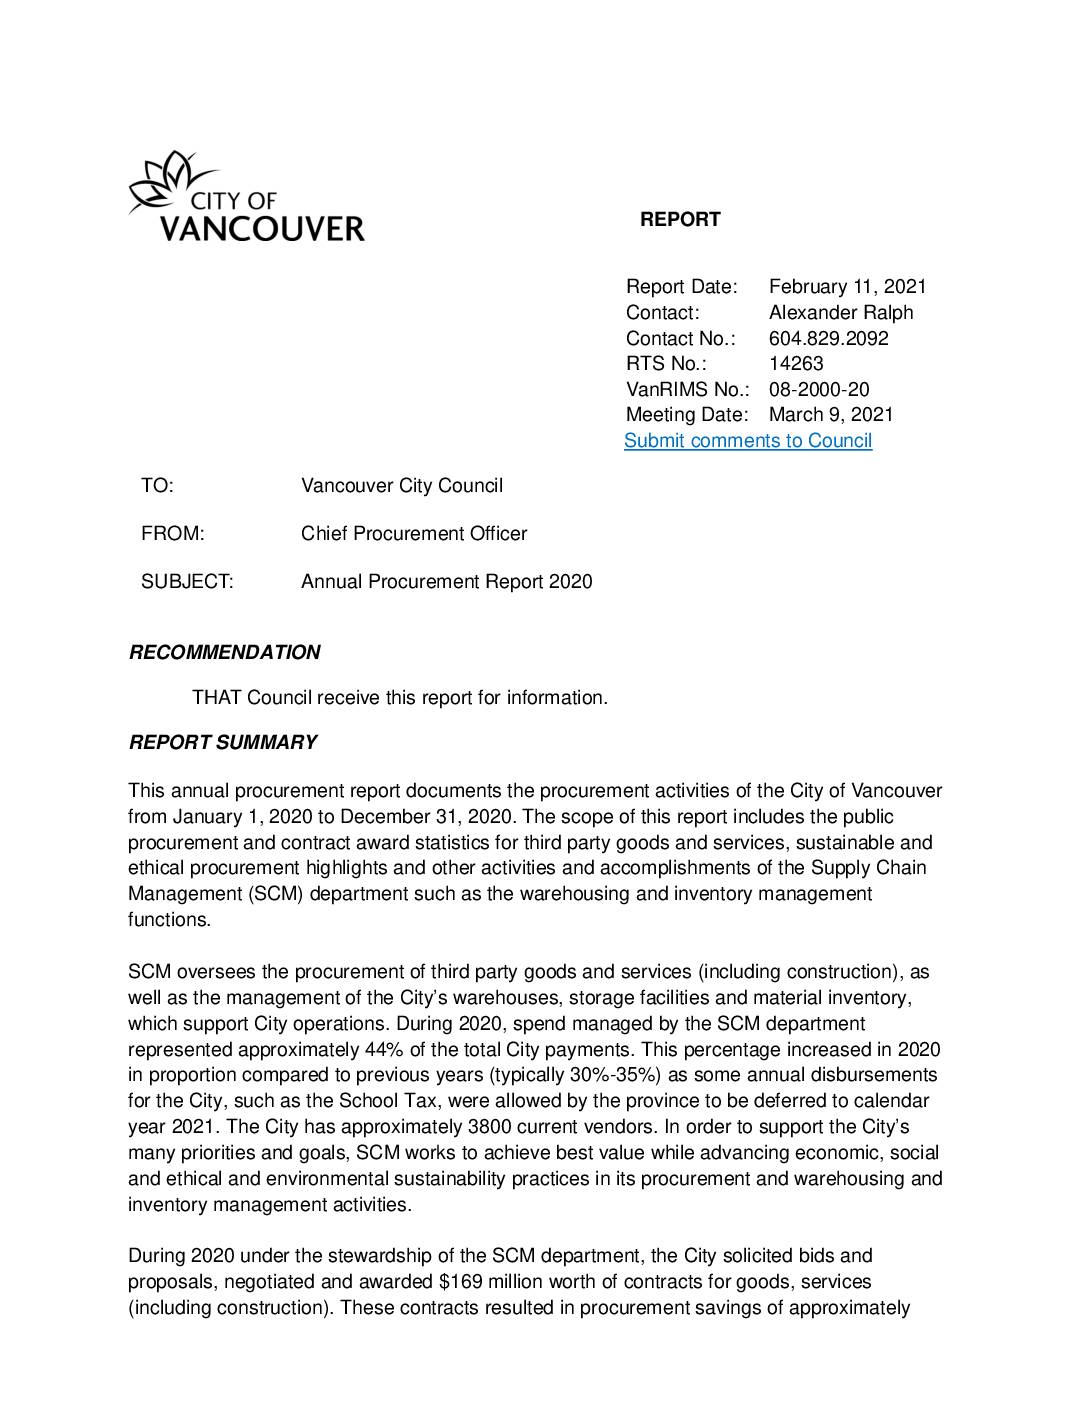 2021 City of Vancouver Sustainable Procurement Report